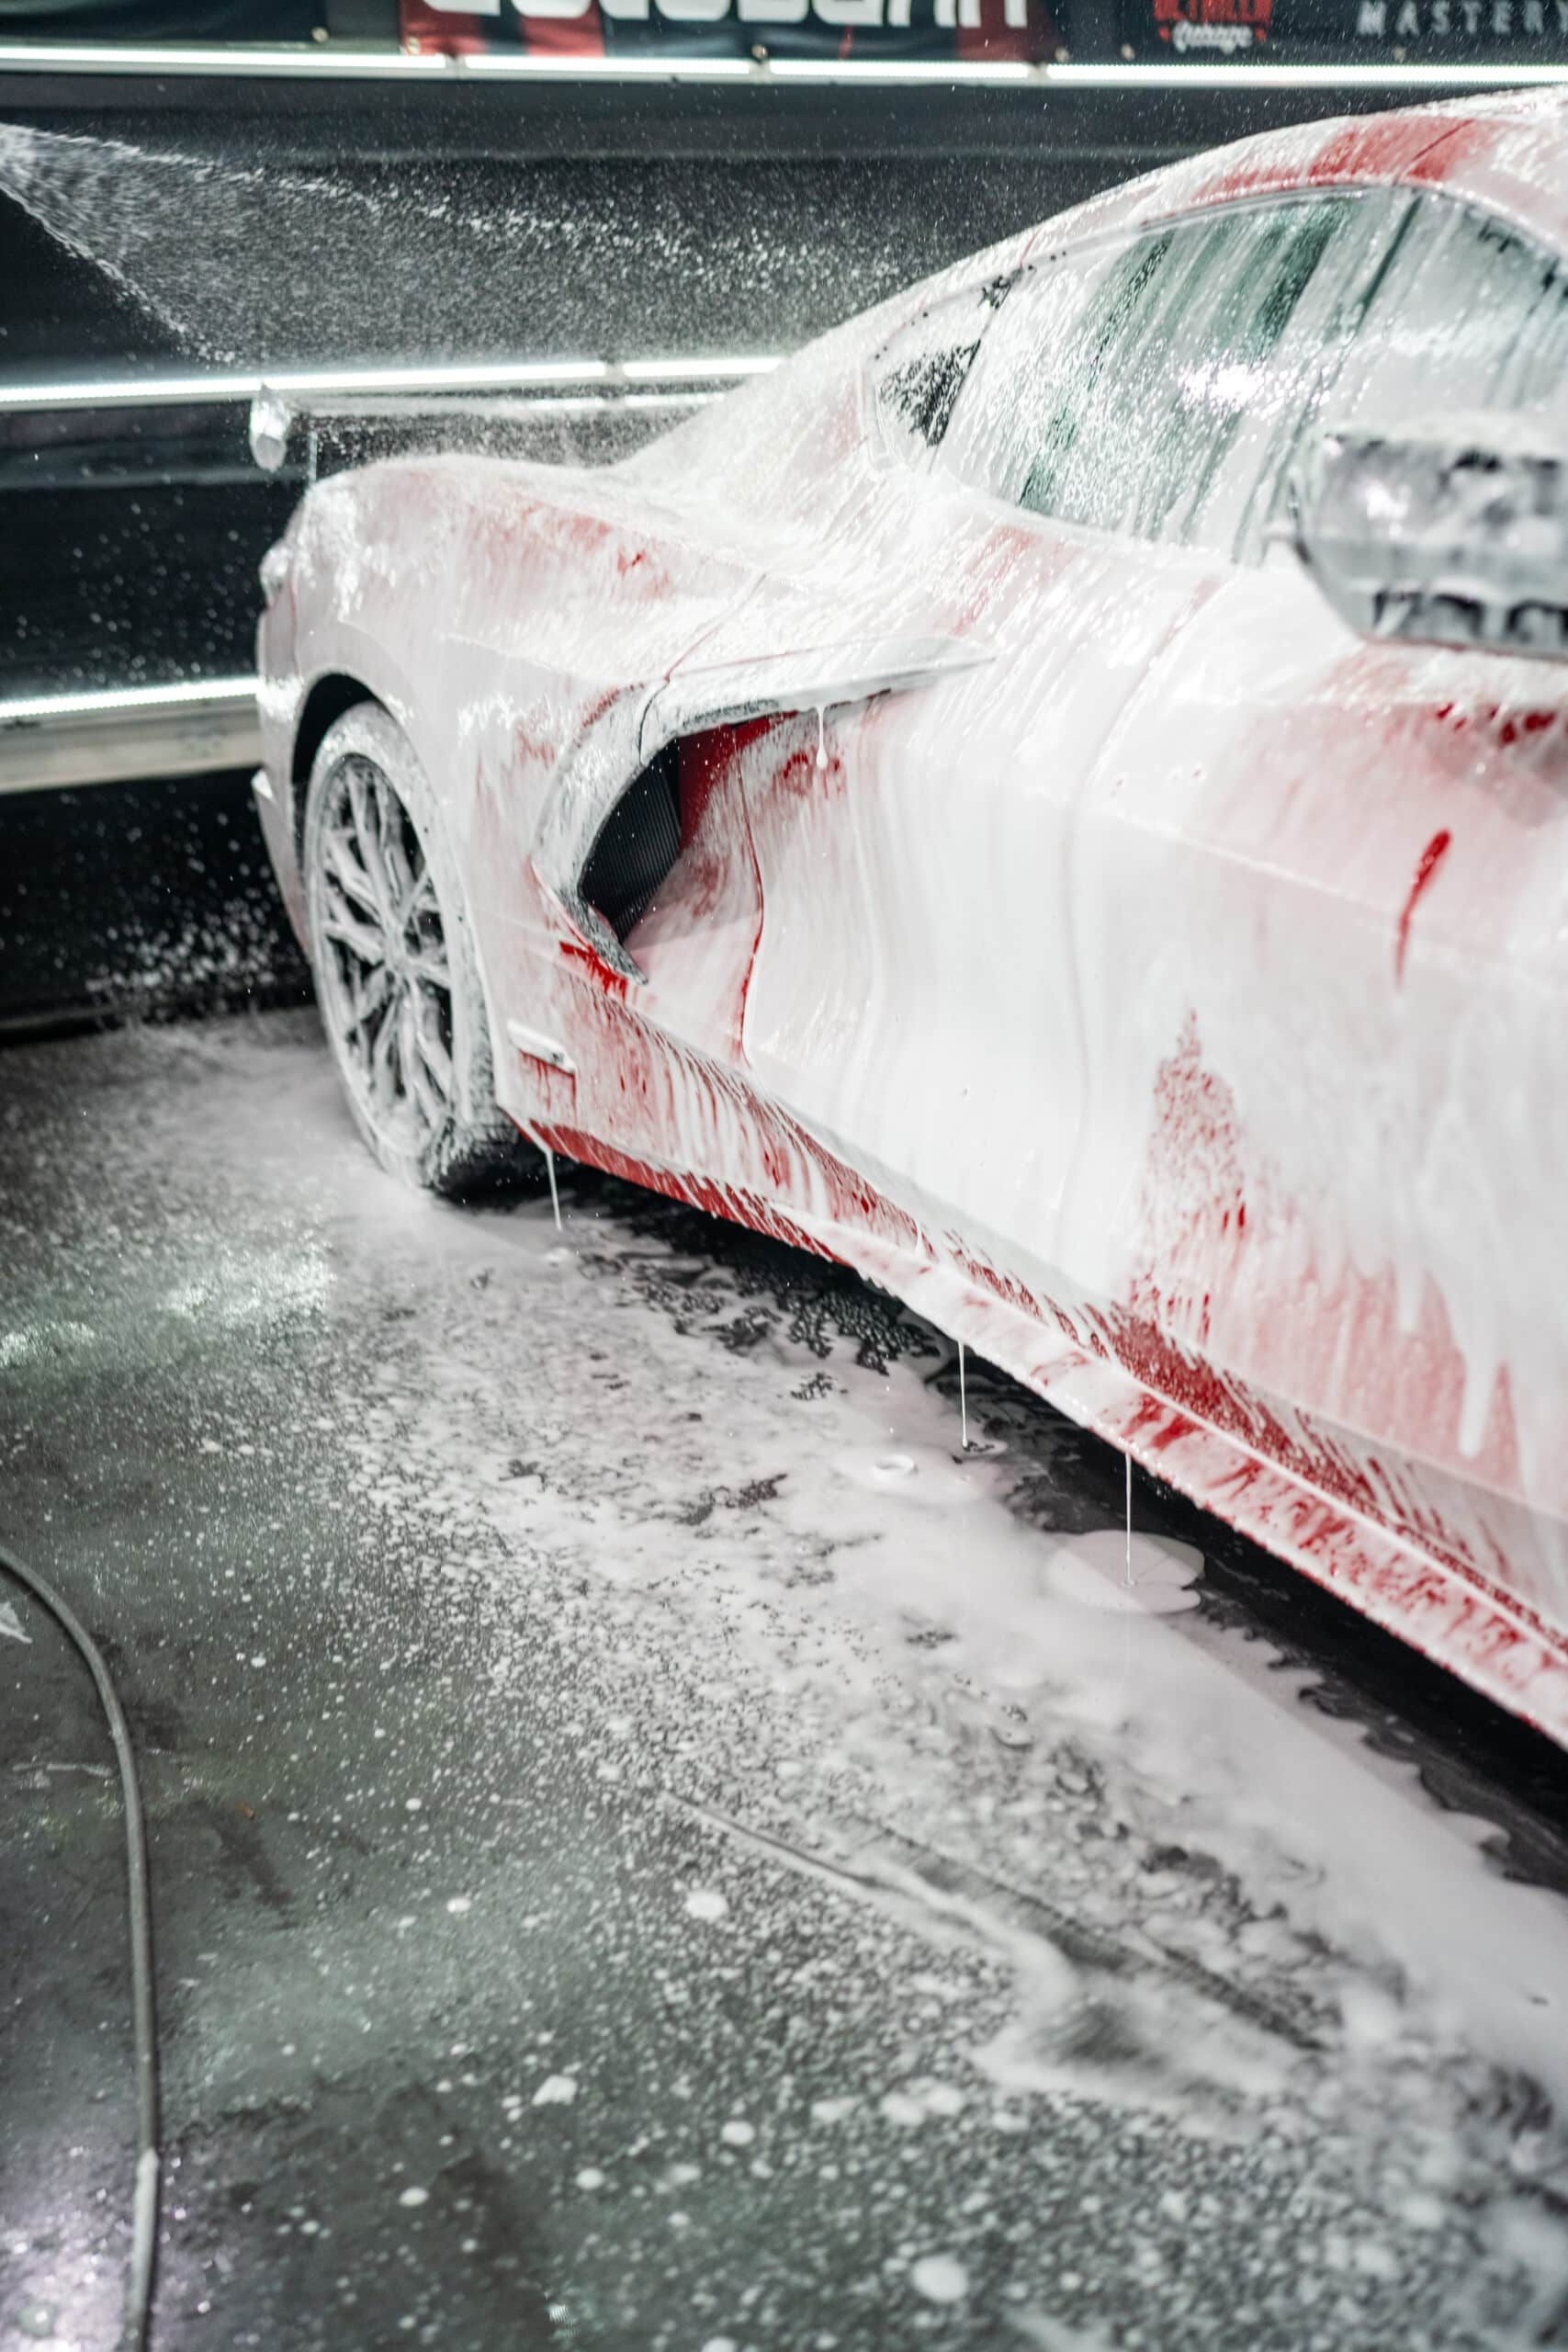 A car is covered in foam while being washed at a car wash.